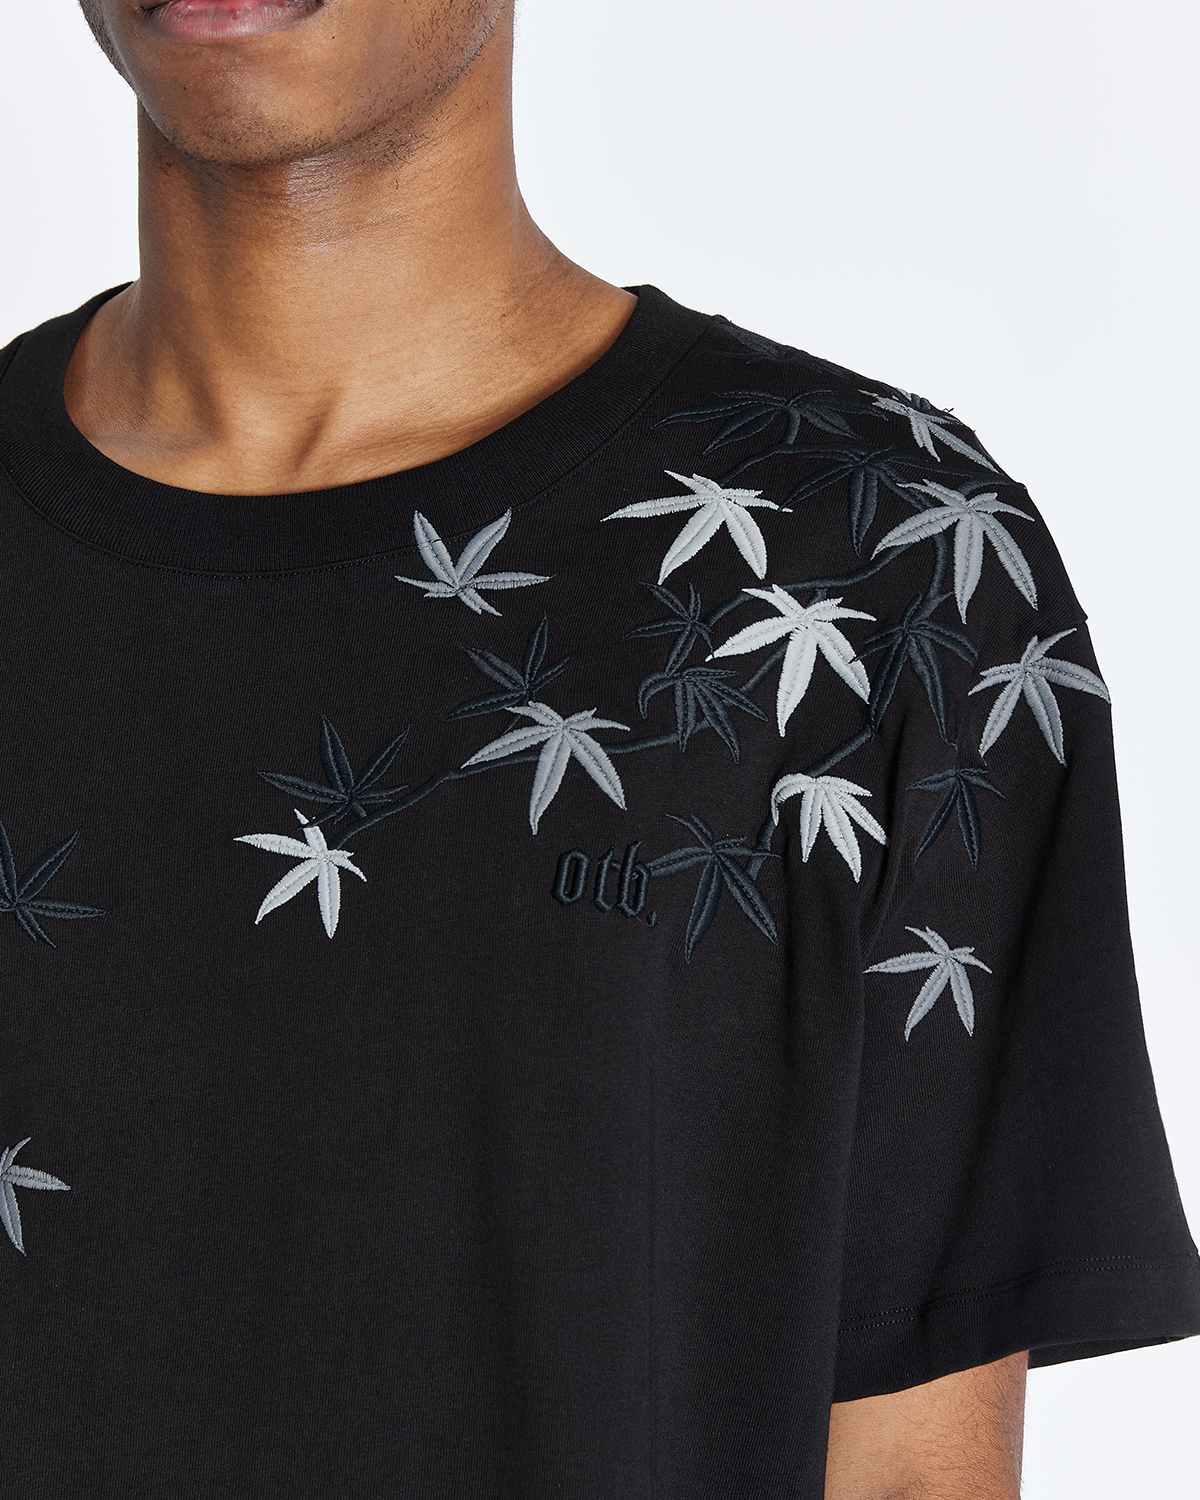 Black Maple Embroidered T-shirt